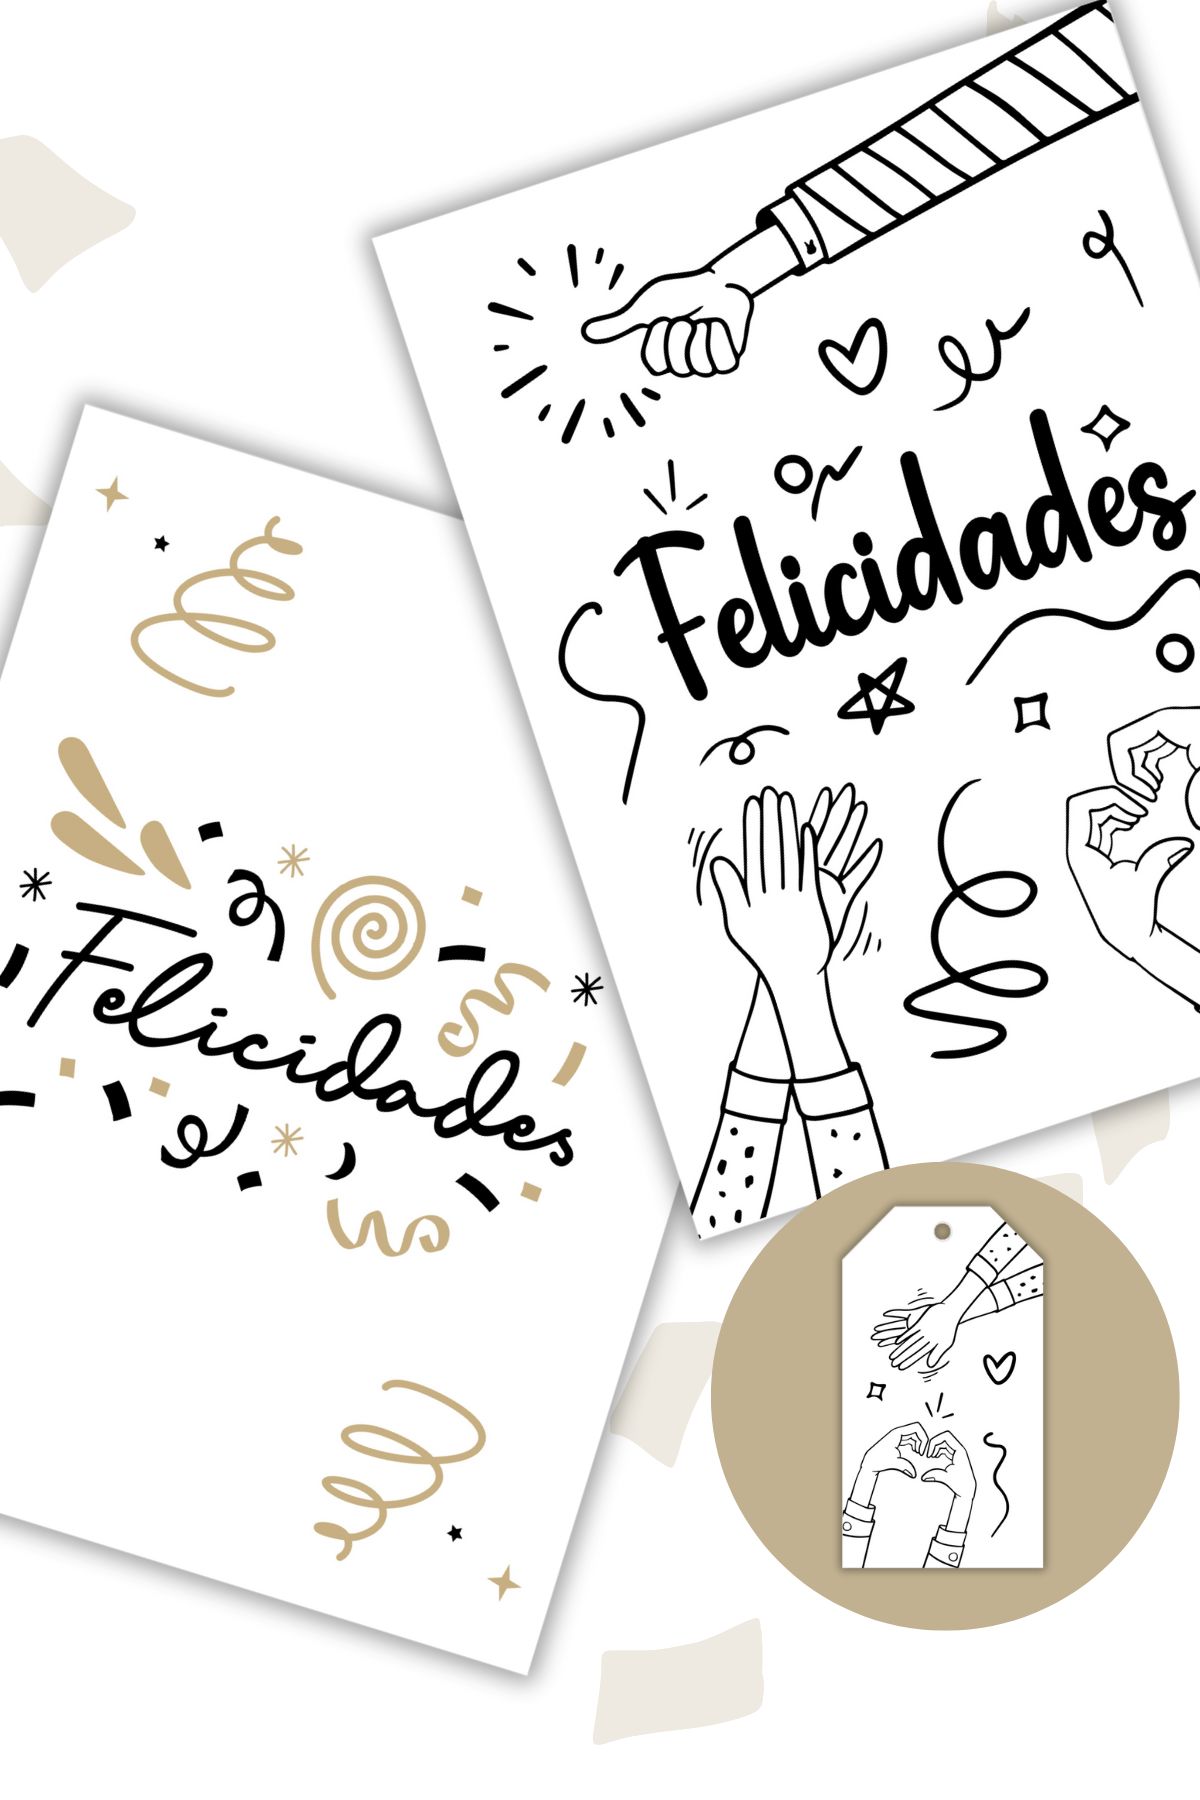 Two printable Felicidades card- Congratulations in Spanish - with celebratory drawings.